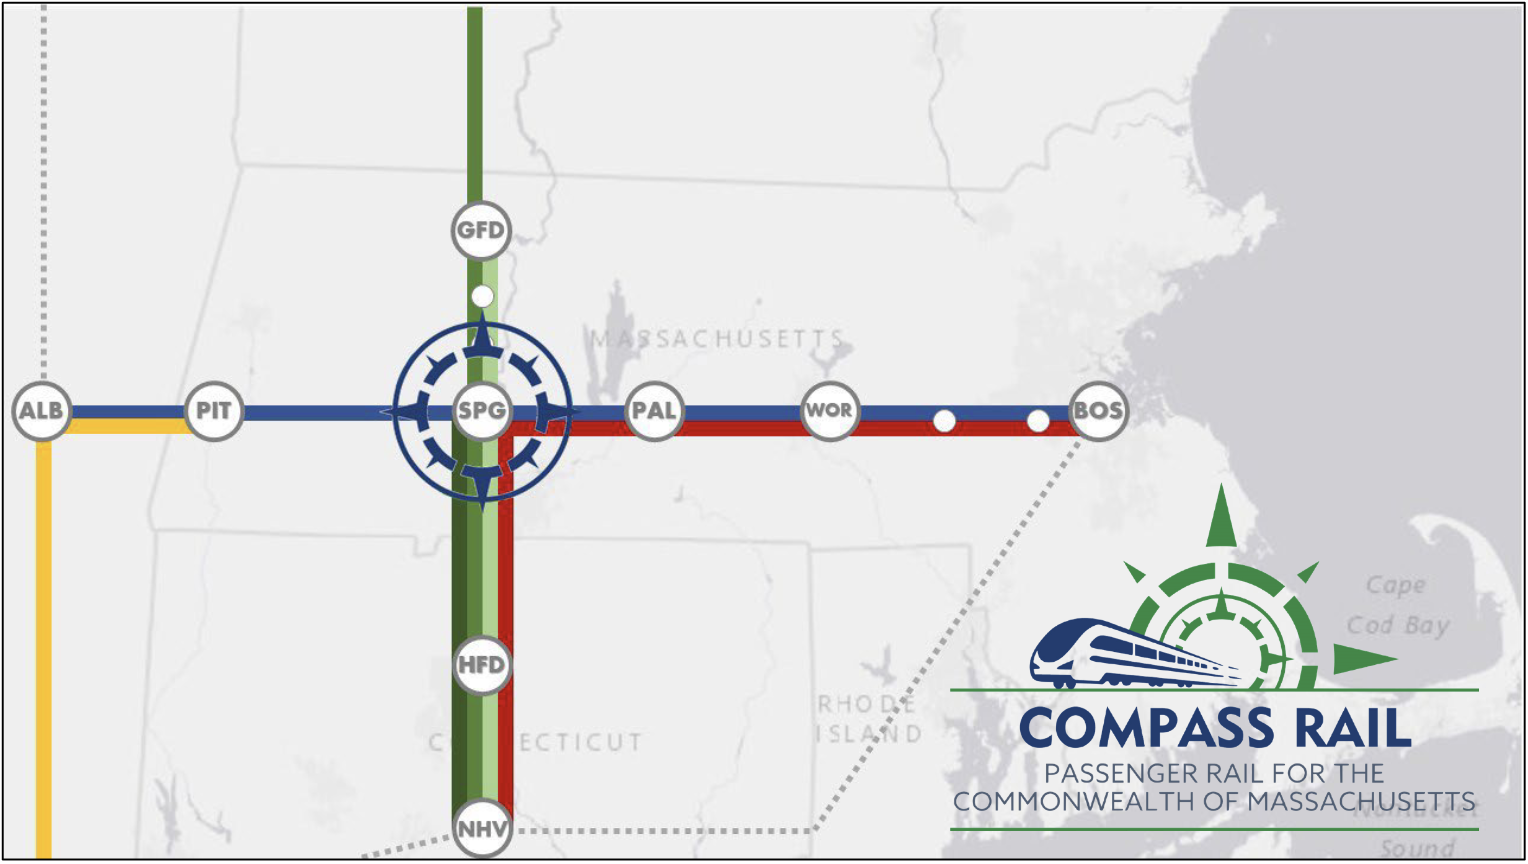 A map of Massachusetts with a cross of rail lines representing north-south Amtrak routes through the CT River Valley and east-west routes from Albany to Boston. The cross meets in Springfield. An icon in the lower right describes the vision as "Compass Rail: passenger rail for the Commonwealth of Massachusetts"